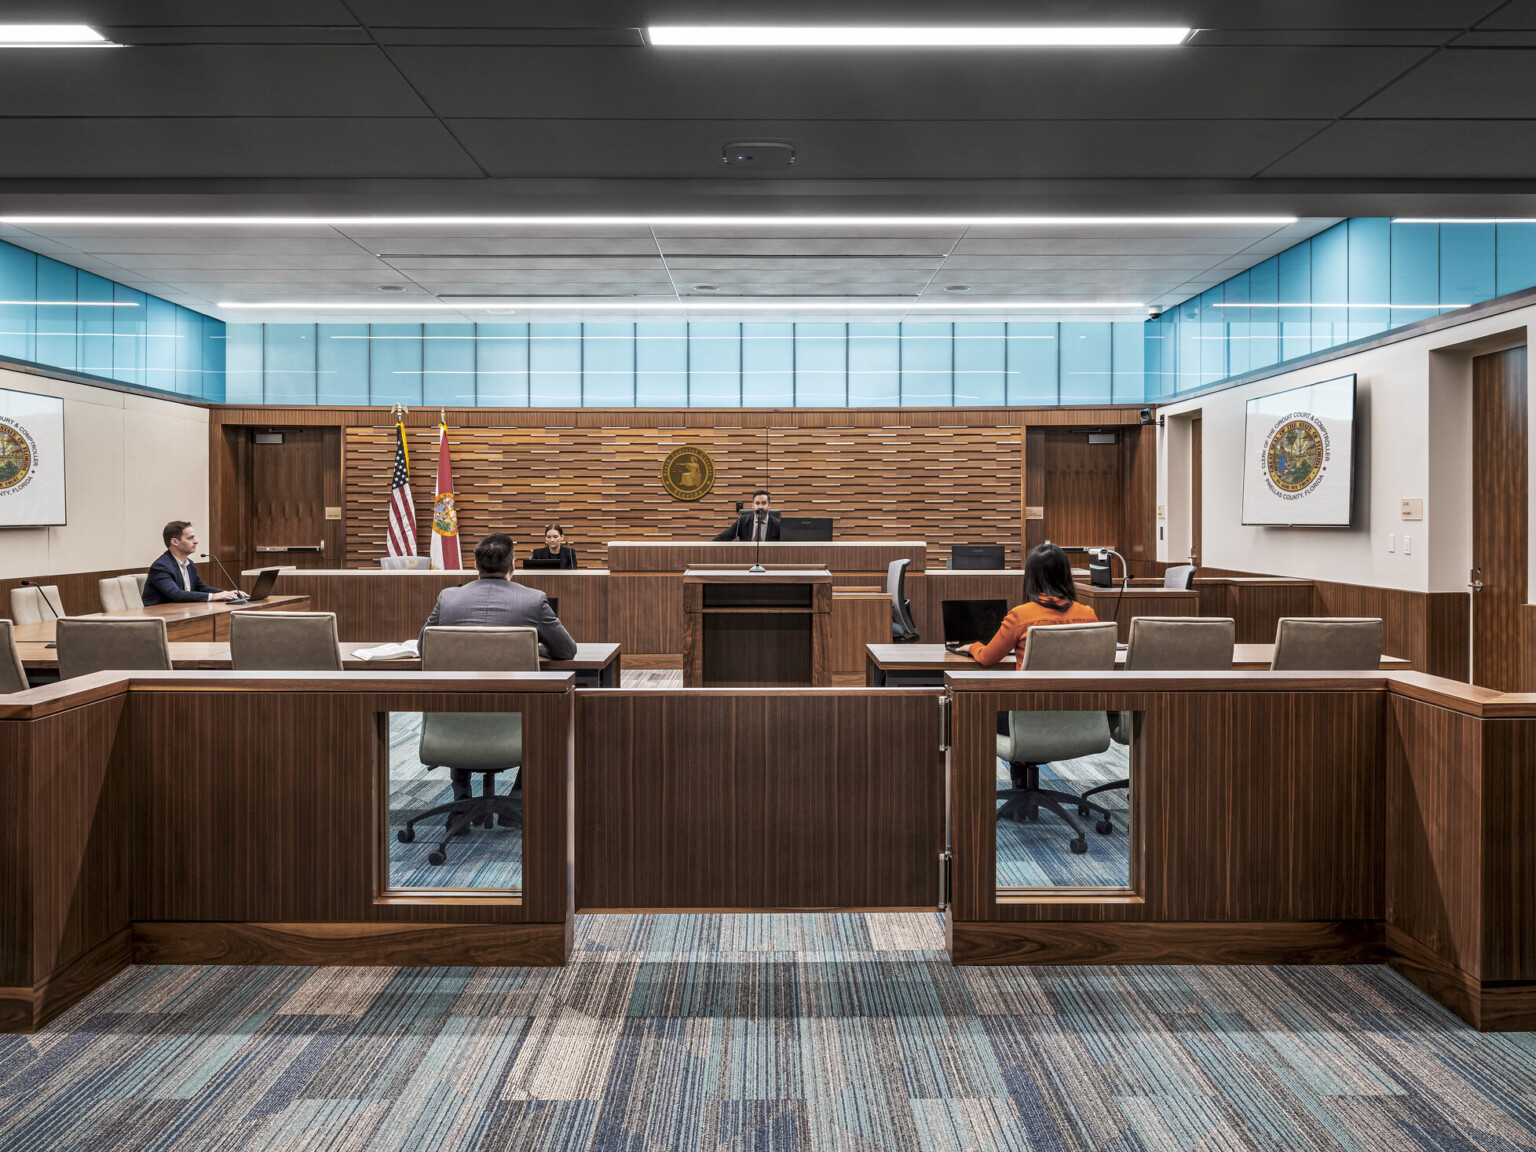 four people seated in family courtroom, turquoise-tinted clerestory windows run across three walls below the ceiling providing natural light, darker wood panels on back wall, podium, desks, dividers and gates, geometric patterned low-pile carpet in soothing cool hues